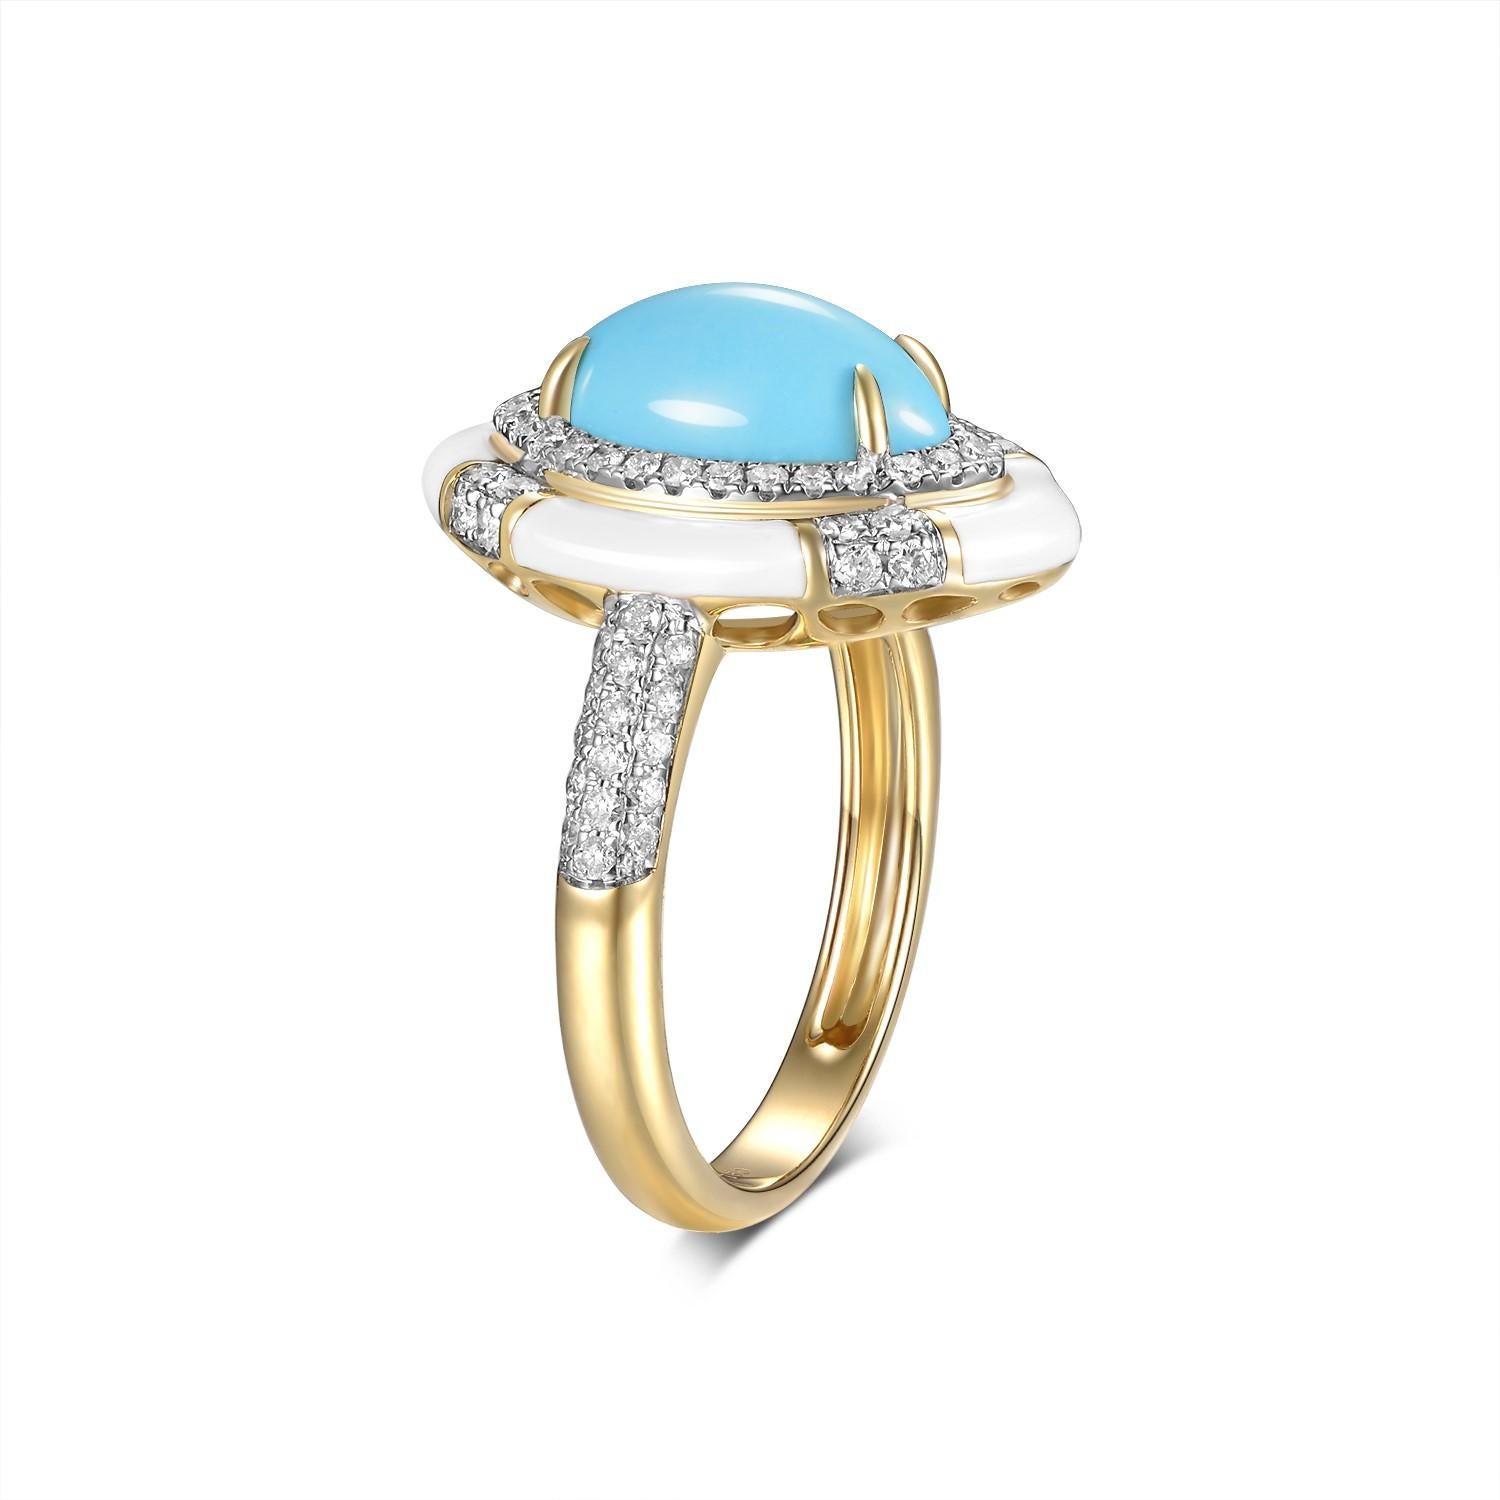 This eye-catching ring is a bold statement piece, beautifully crafted in a size US 6.5 with the option available for resizing to ensure a perfect fit. It boasts a vibrant 2.36 carat turquoise centerpiece, renowned for its stunning blue hues that